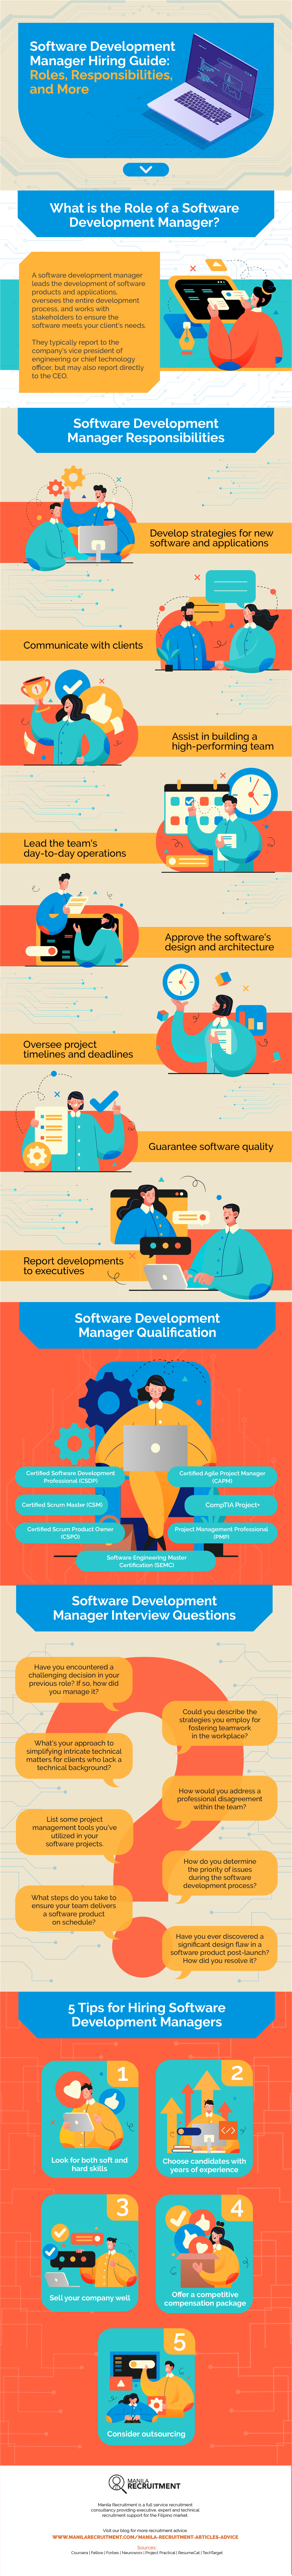 software development manager hiring guide infographic